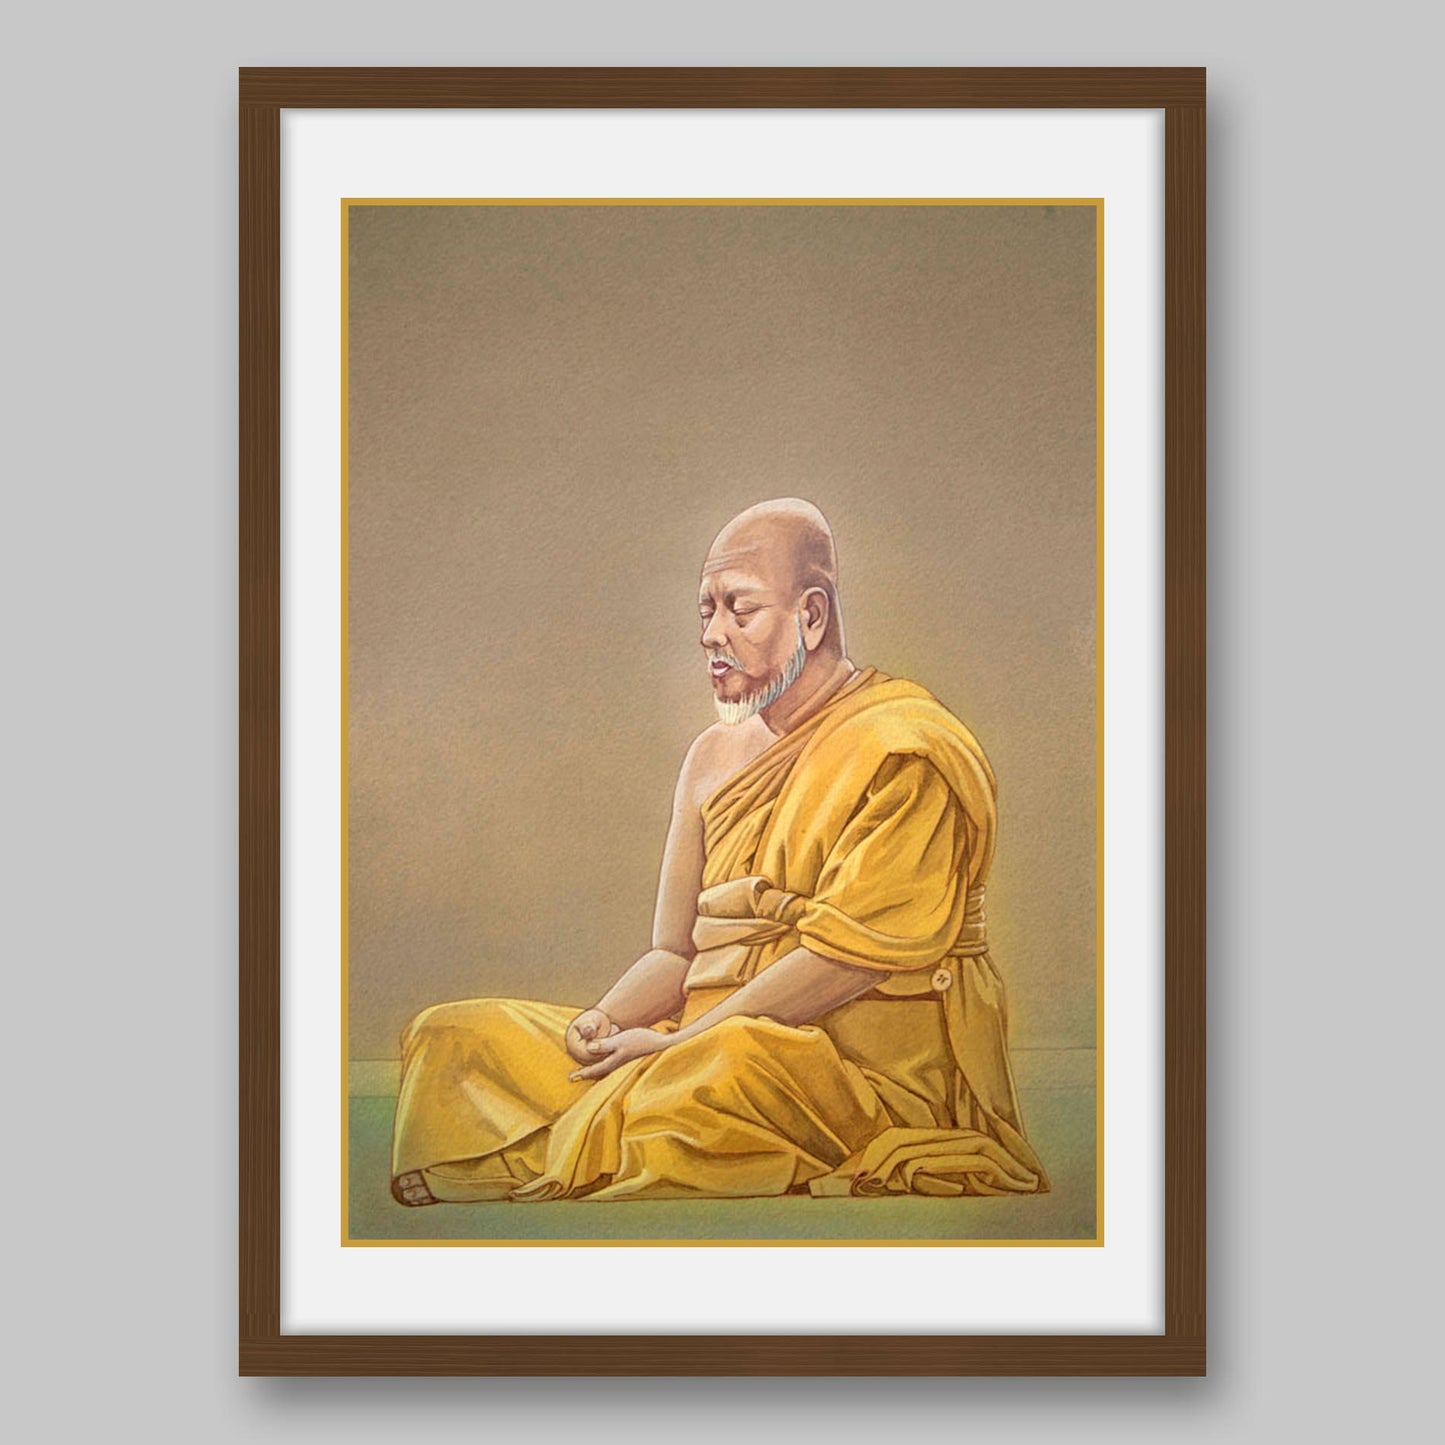 Chinese Zen Master Tung-Shan- High Quality Print of Artwork by Pieter Weltevrede